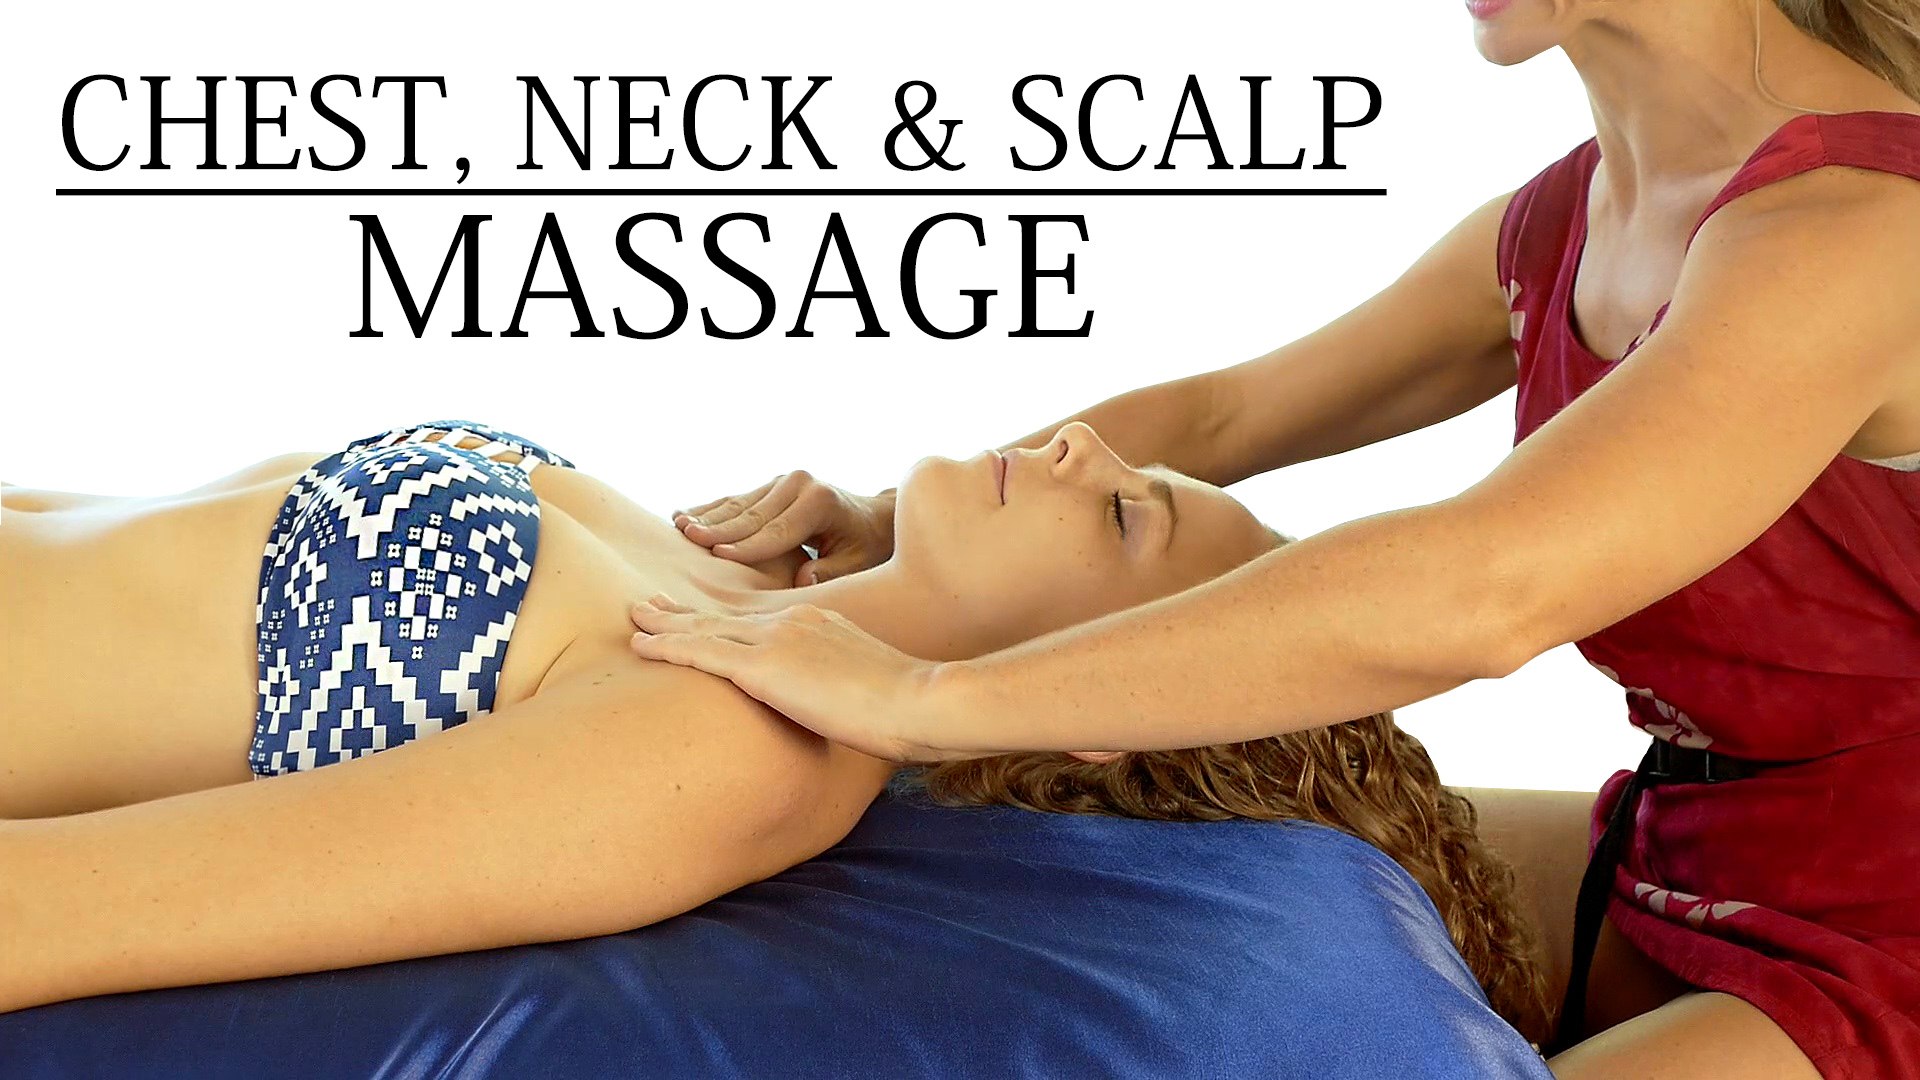 How to Massage the Upper Back for Neck Pain, Shoulder & Scalp for  Headaches, ASMR Relaxing Music 